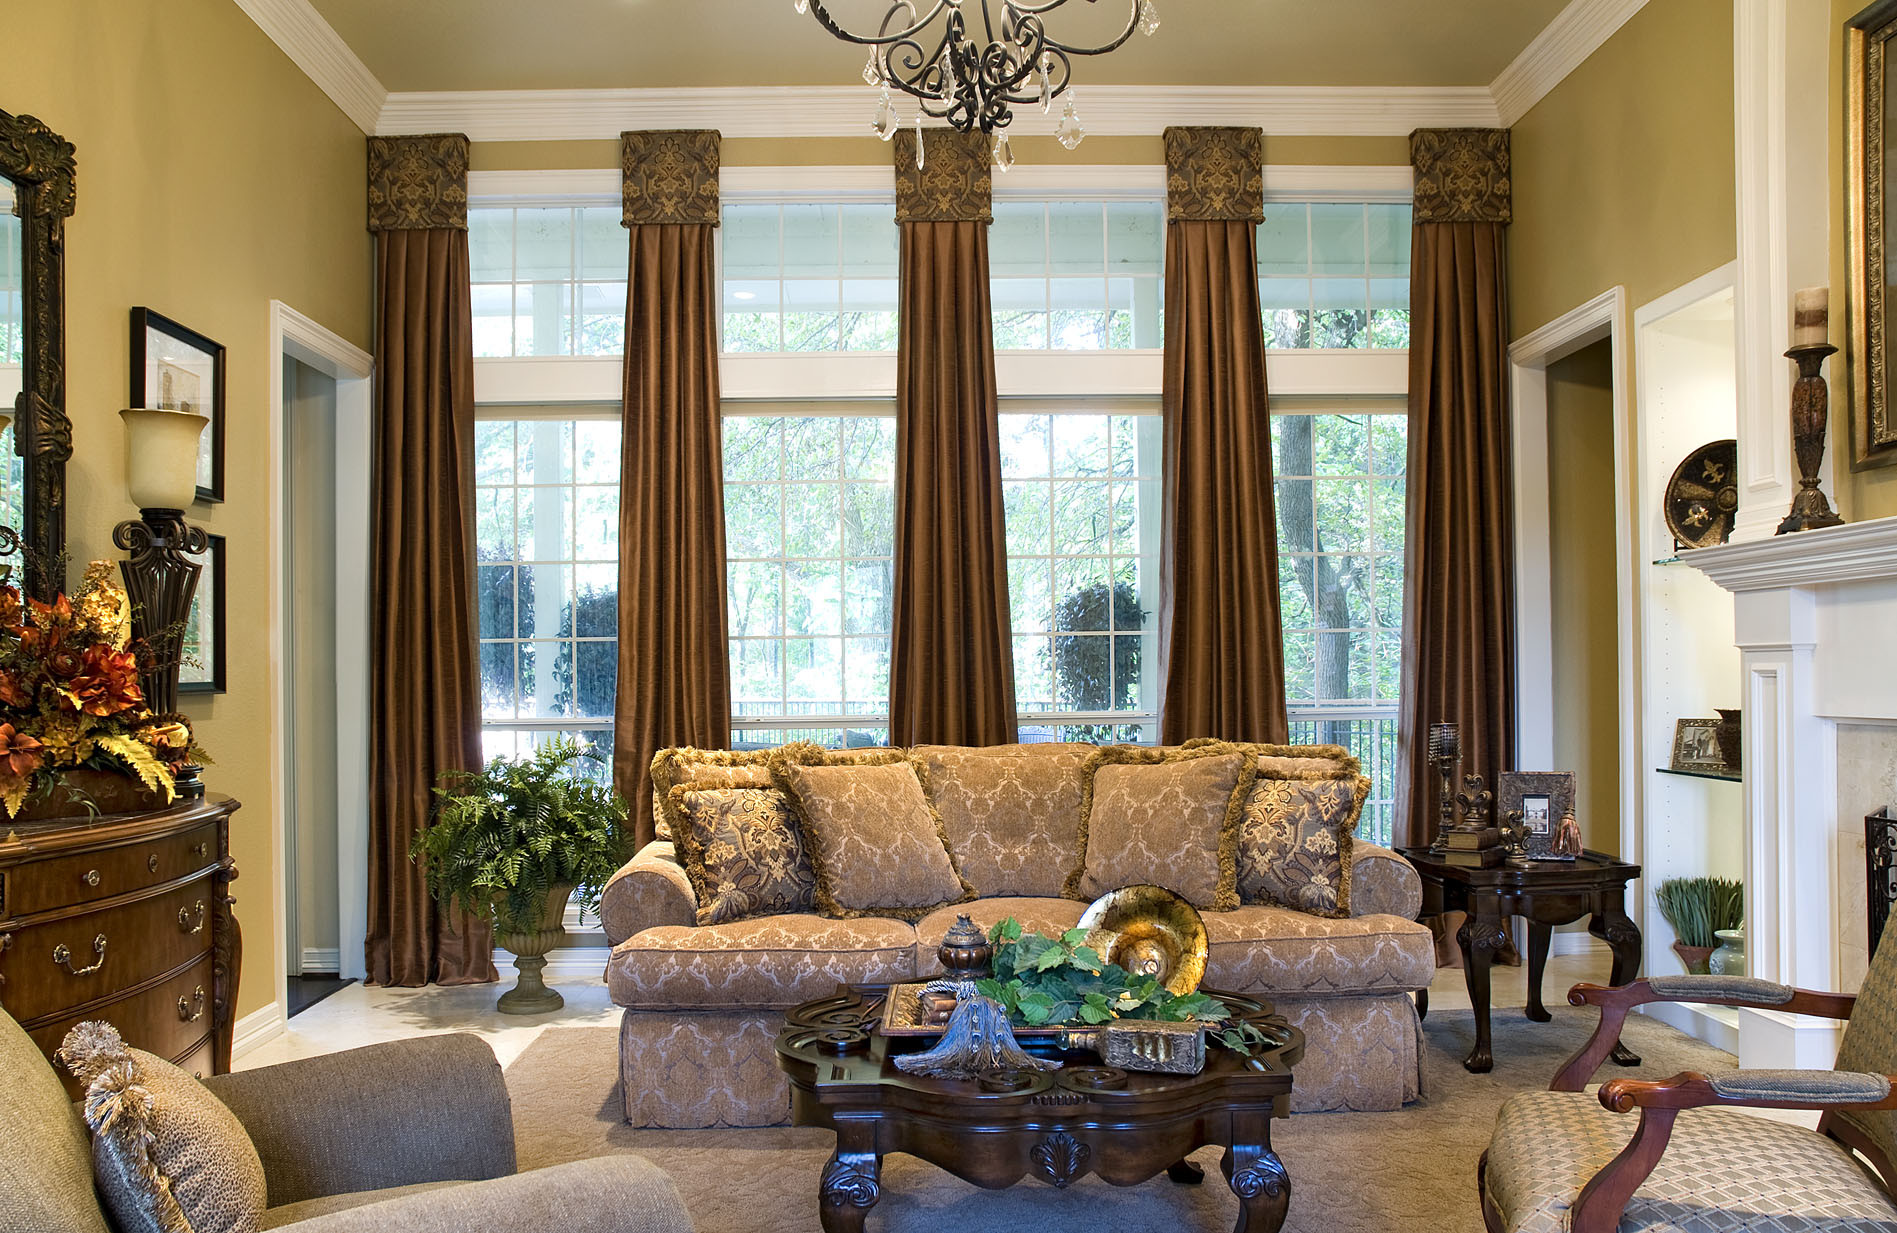 Living Room Window Curtains
 Window Treatments with Drama and Panache